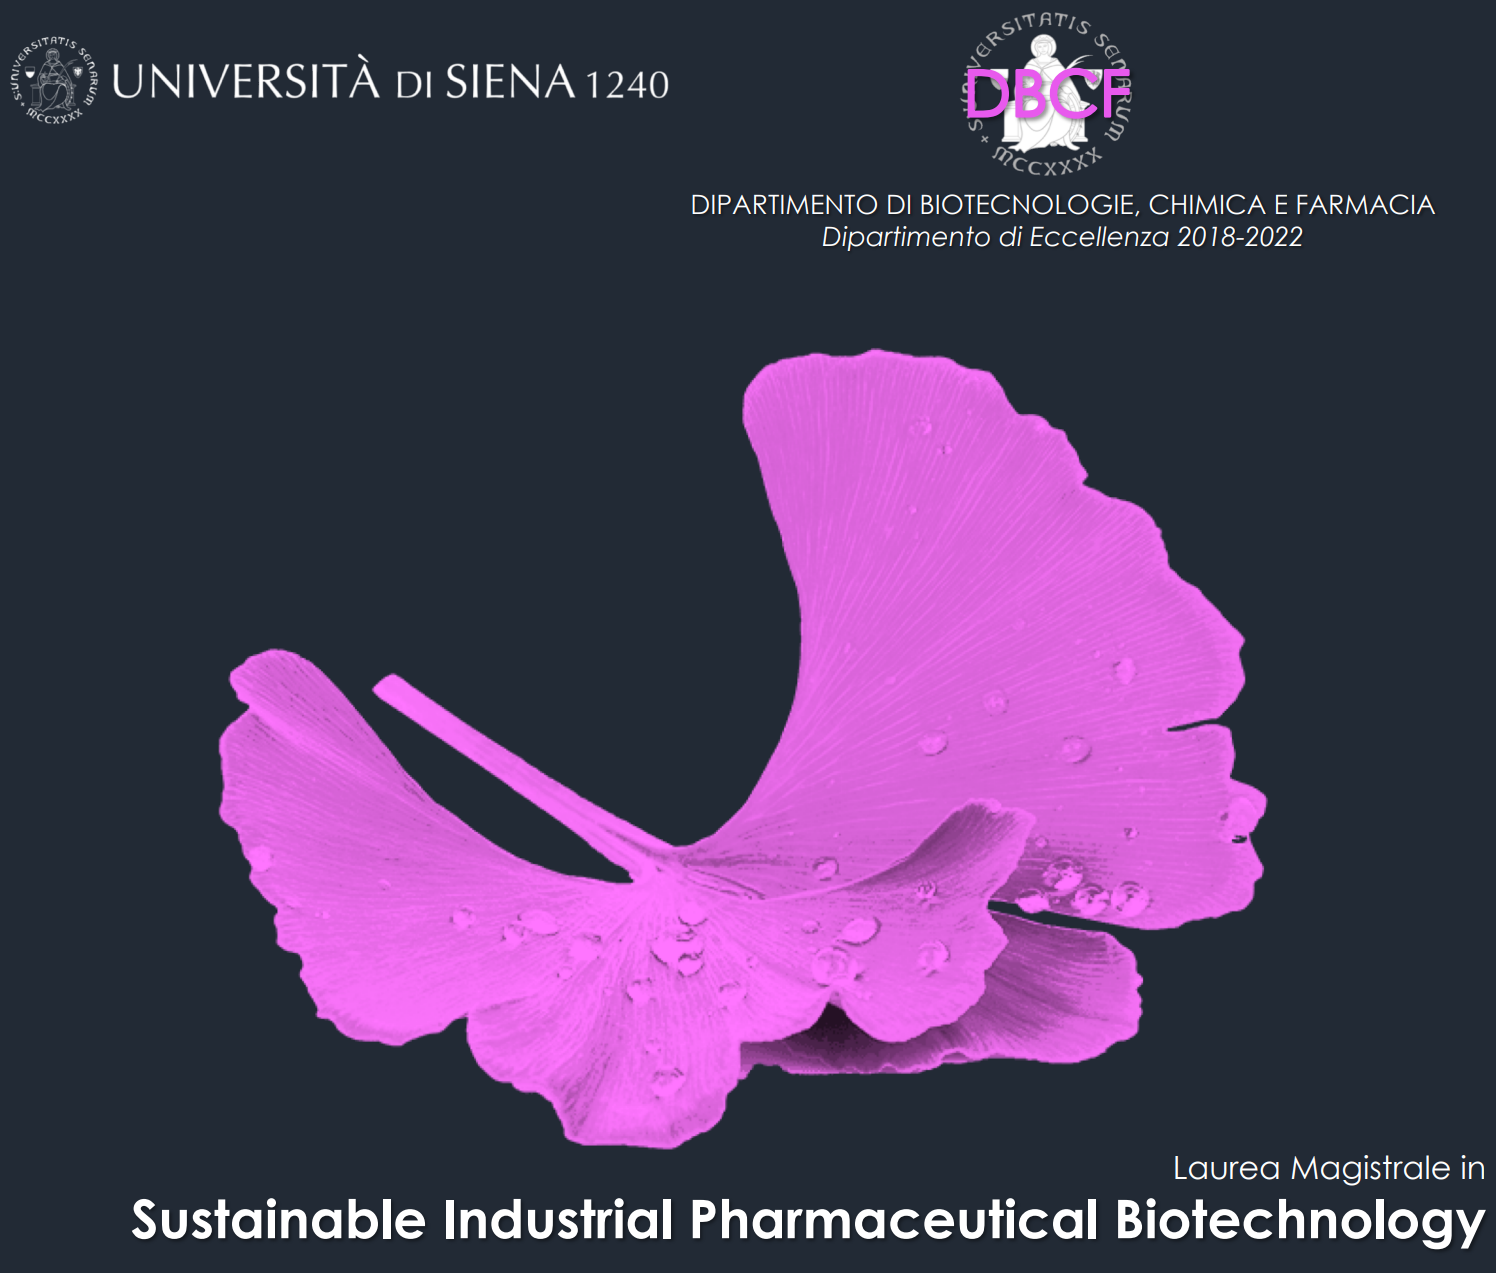 Sustainable Industrial Pharmaceutical Biotechnology, SienabioACTIVE & LIFECARES